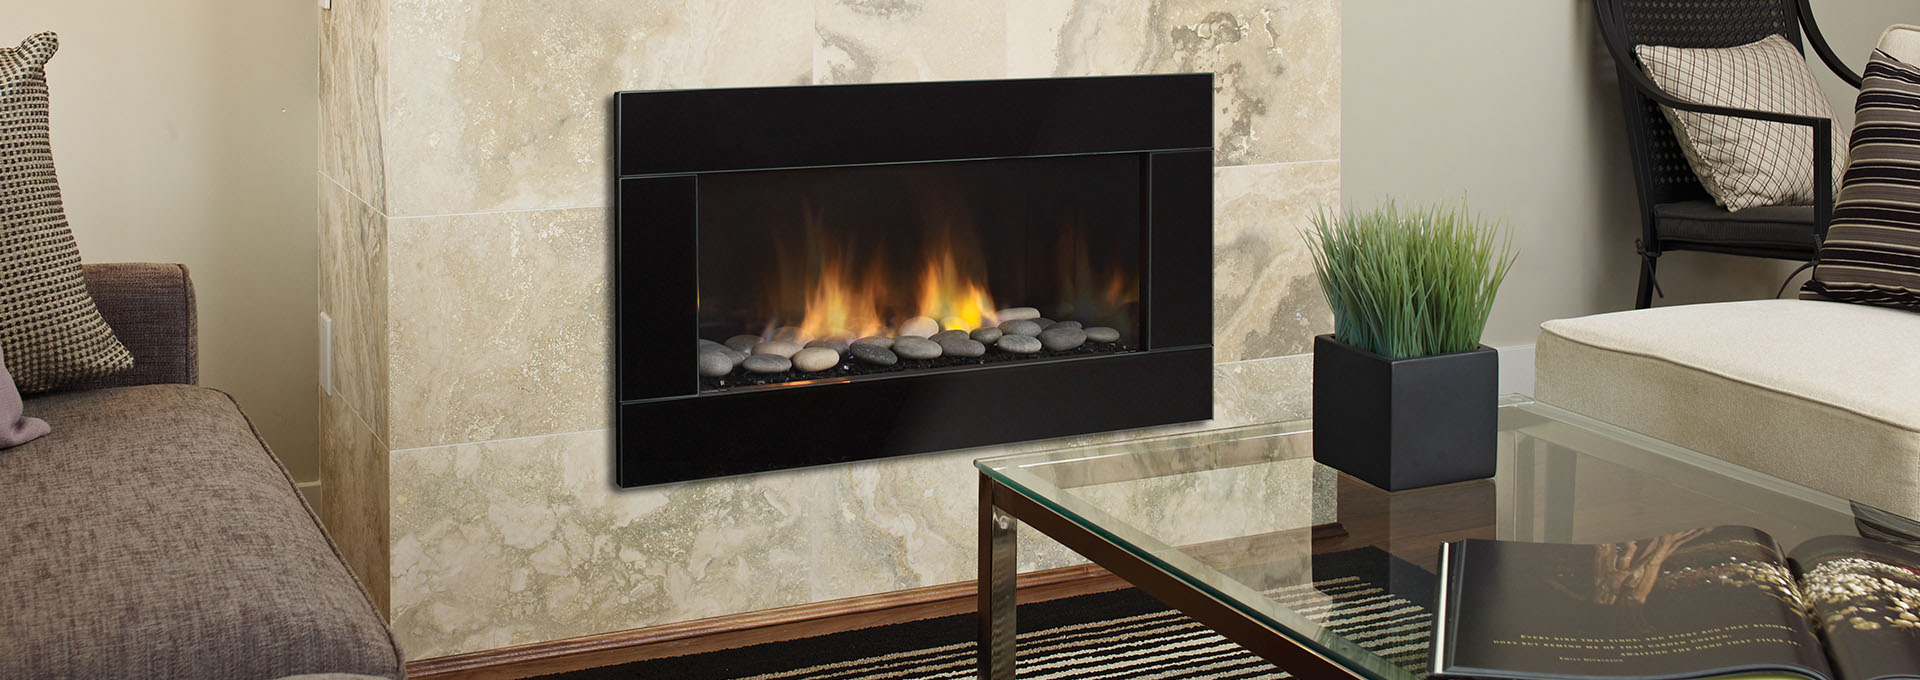 Electric Fireplaces for Sale In Clearance Beautiful Fireplaces toronto Fireplace Repair & Maintenance